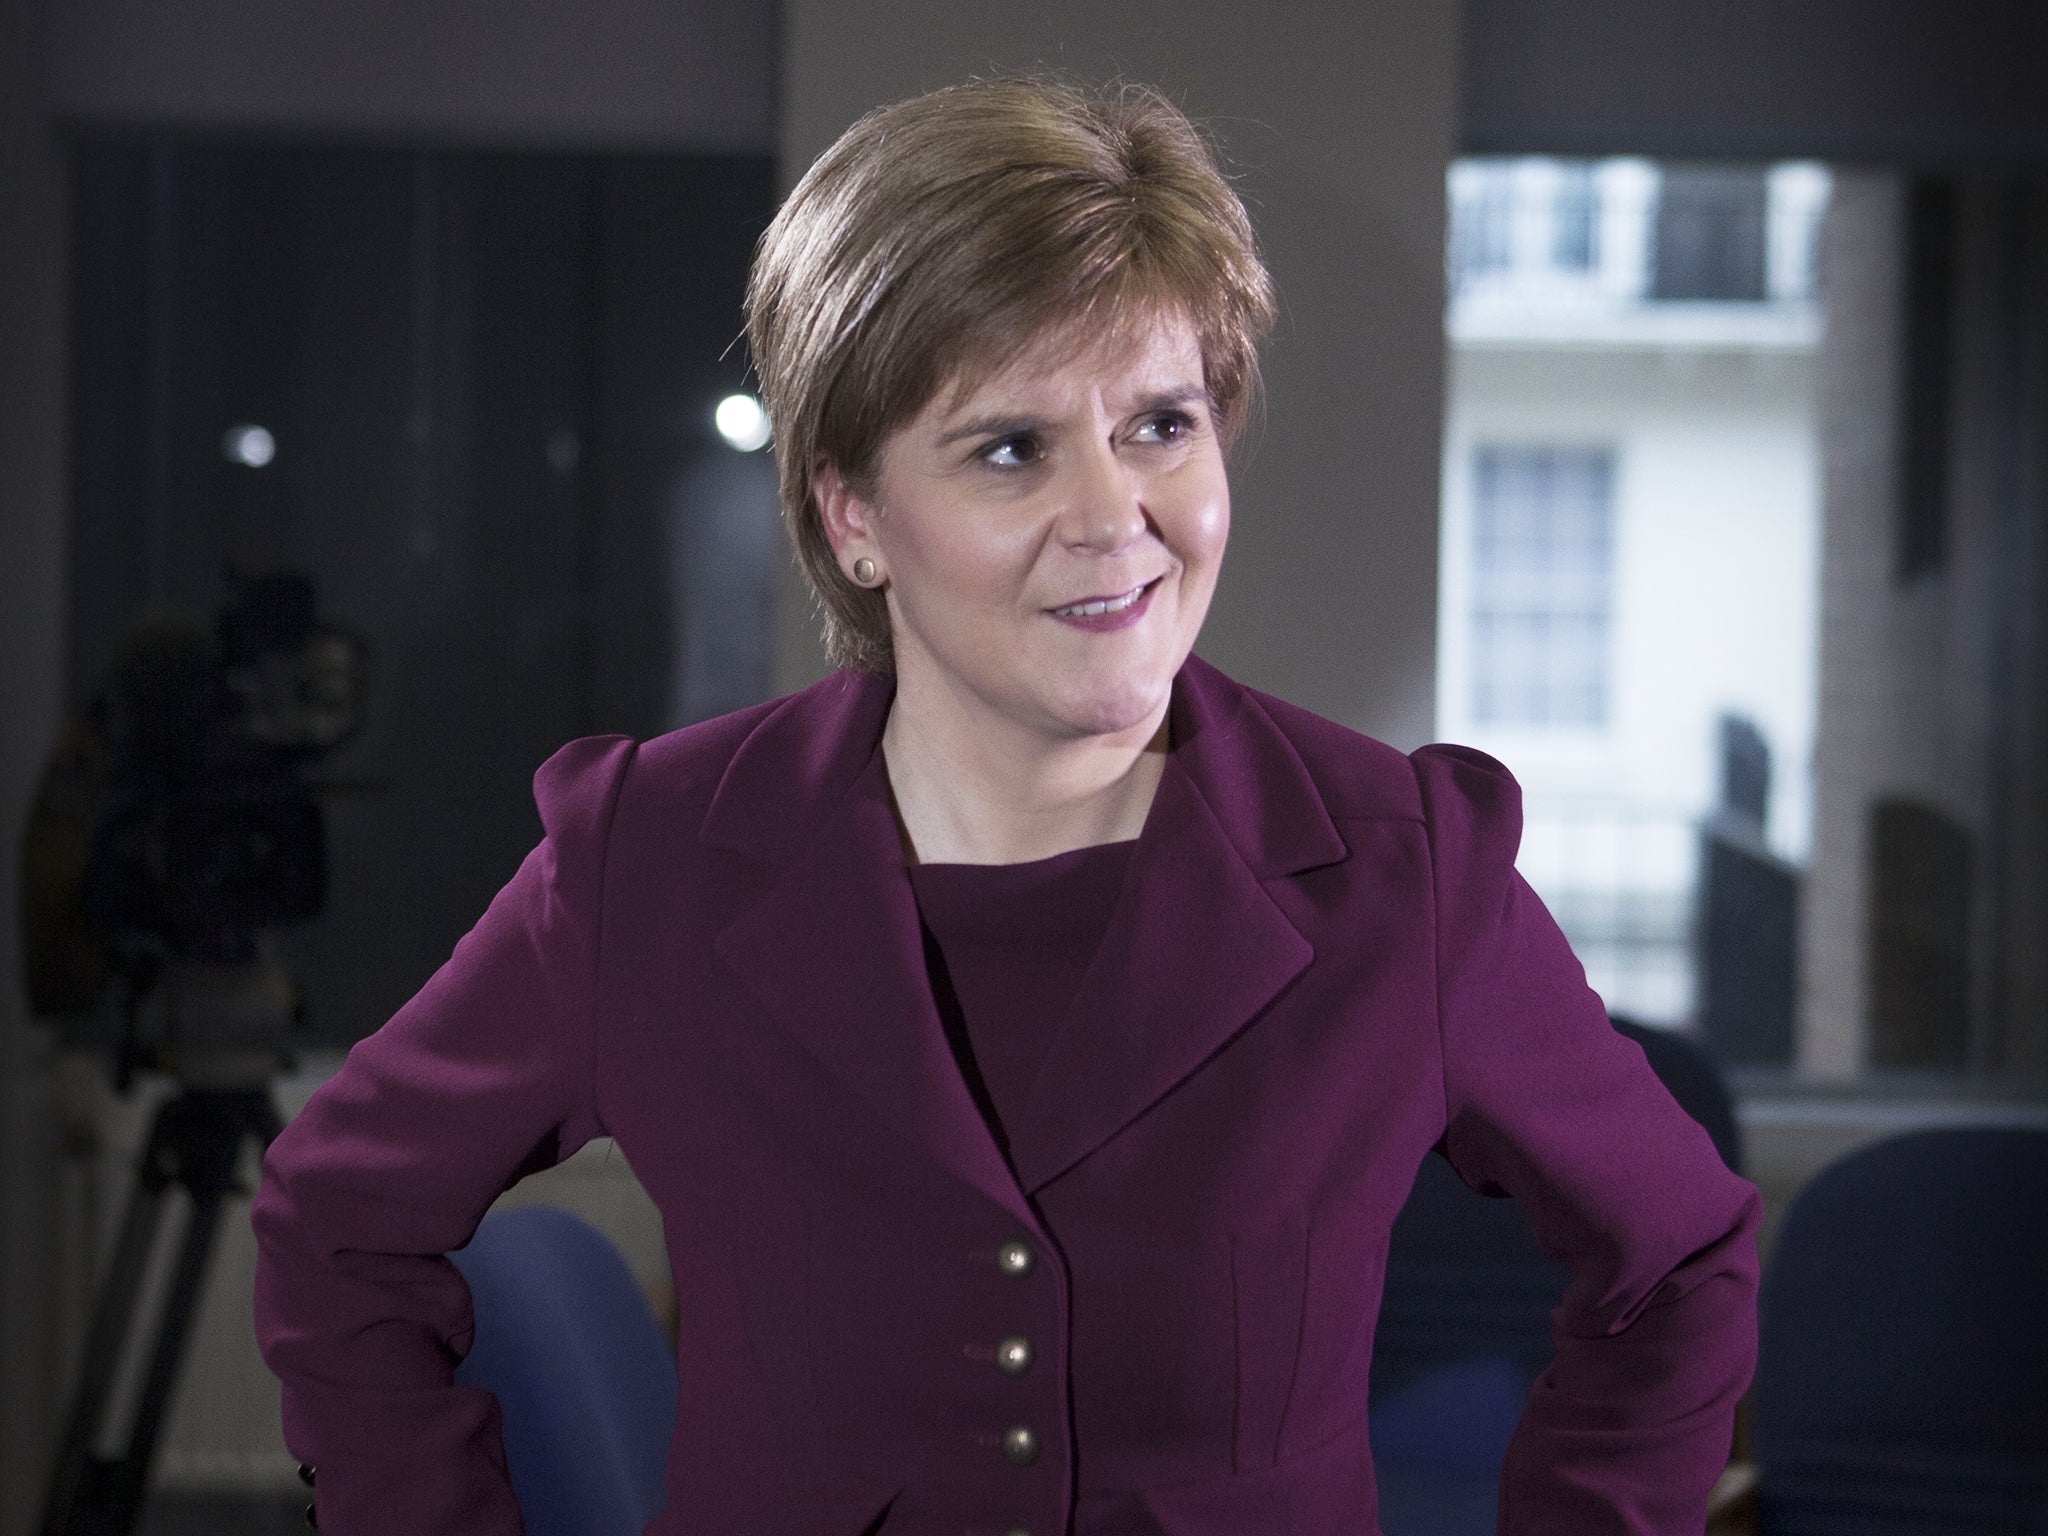 Political foes admitted today that the Scottish National Party leader was the biggest winner in the only TV election debate between the seven party leaders, which was watched by 7.4m viewers on Thursday.